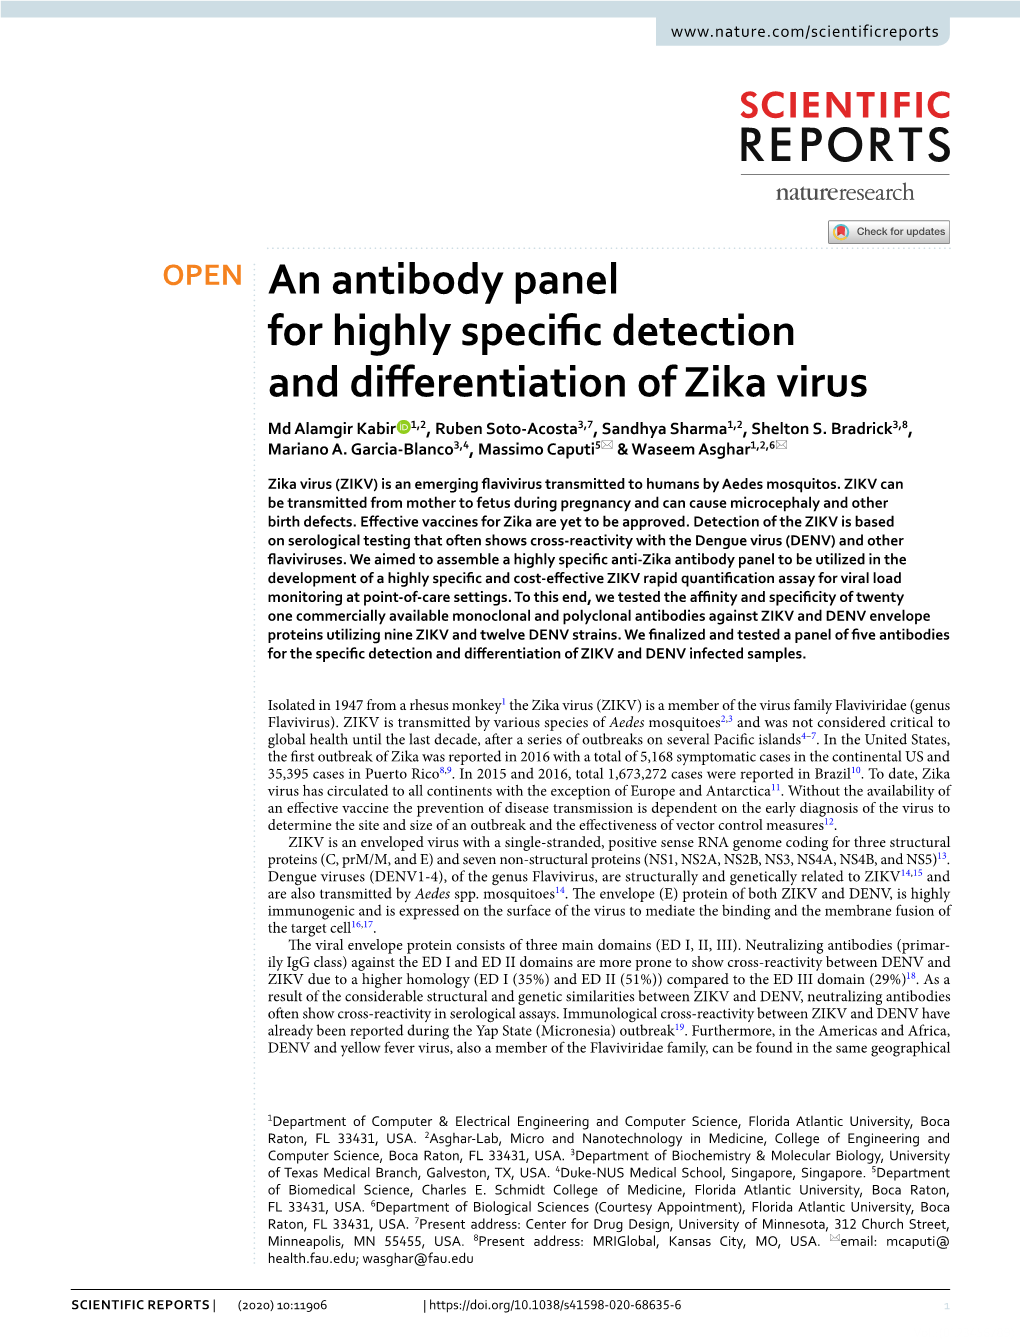 An Antibody Panel for Highly Specific Detection and Differentiation of Zika